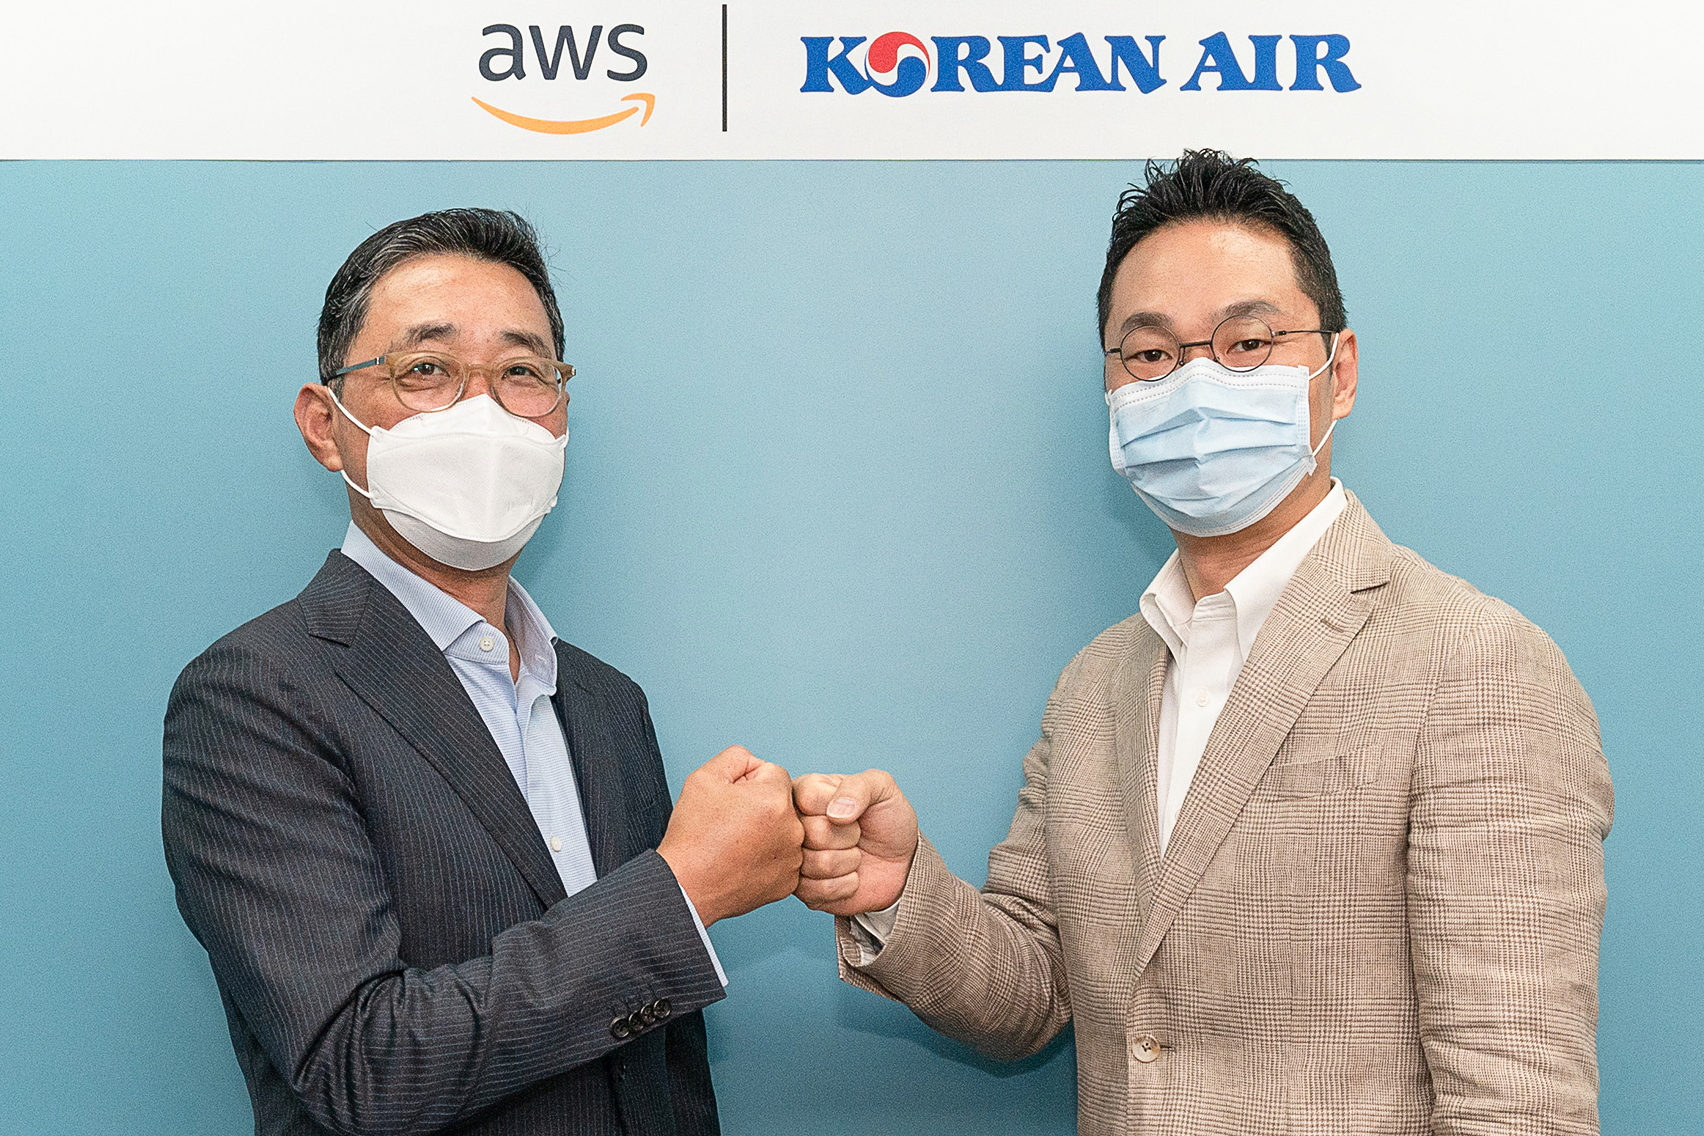 Kee Ho Ham (left), Managing Director of AWS Korea with Kenneth Chang, Executive Vice President of Korean Air. Click to enlarge.